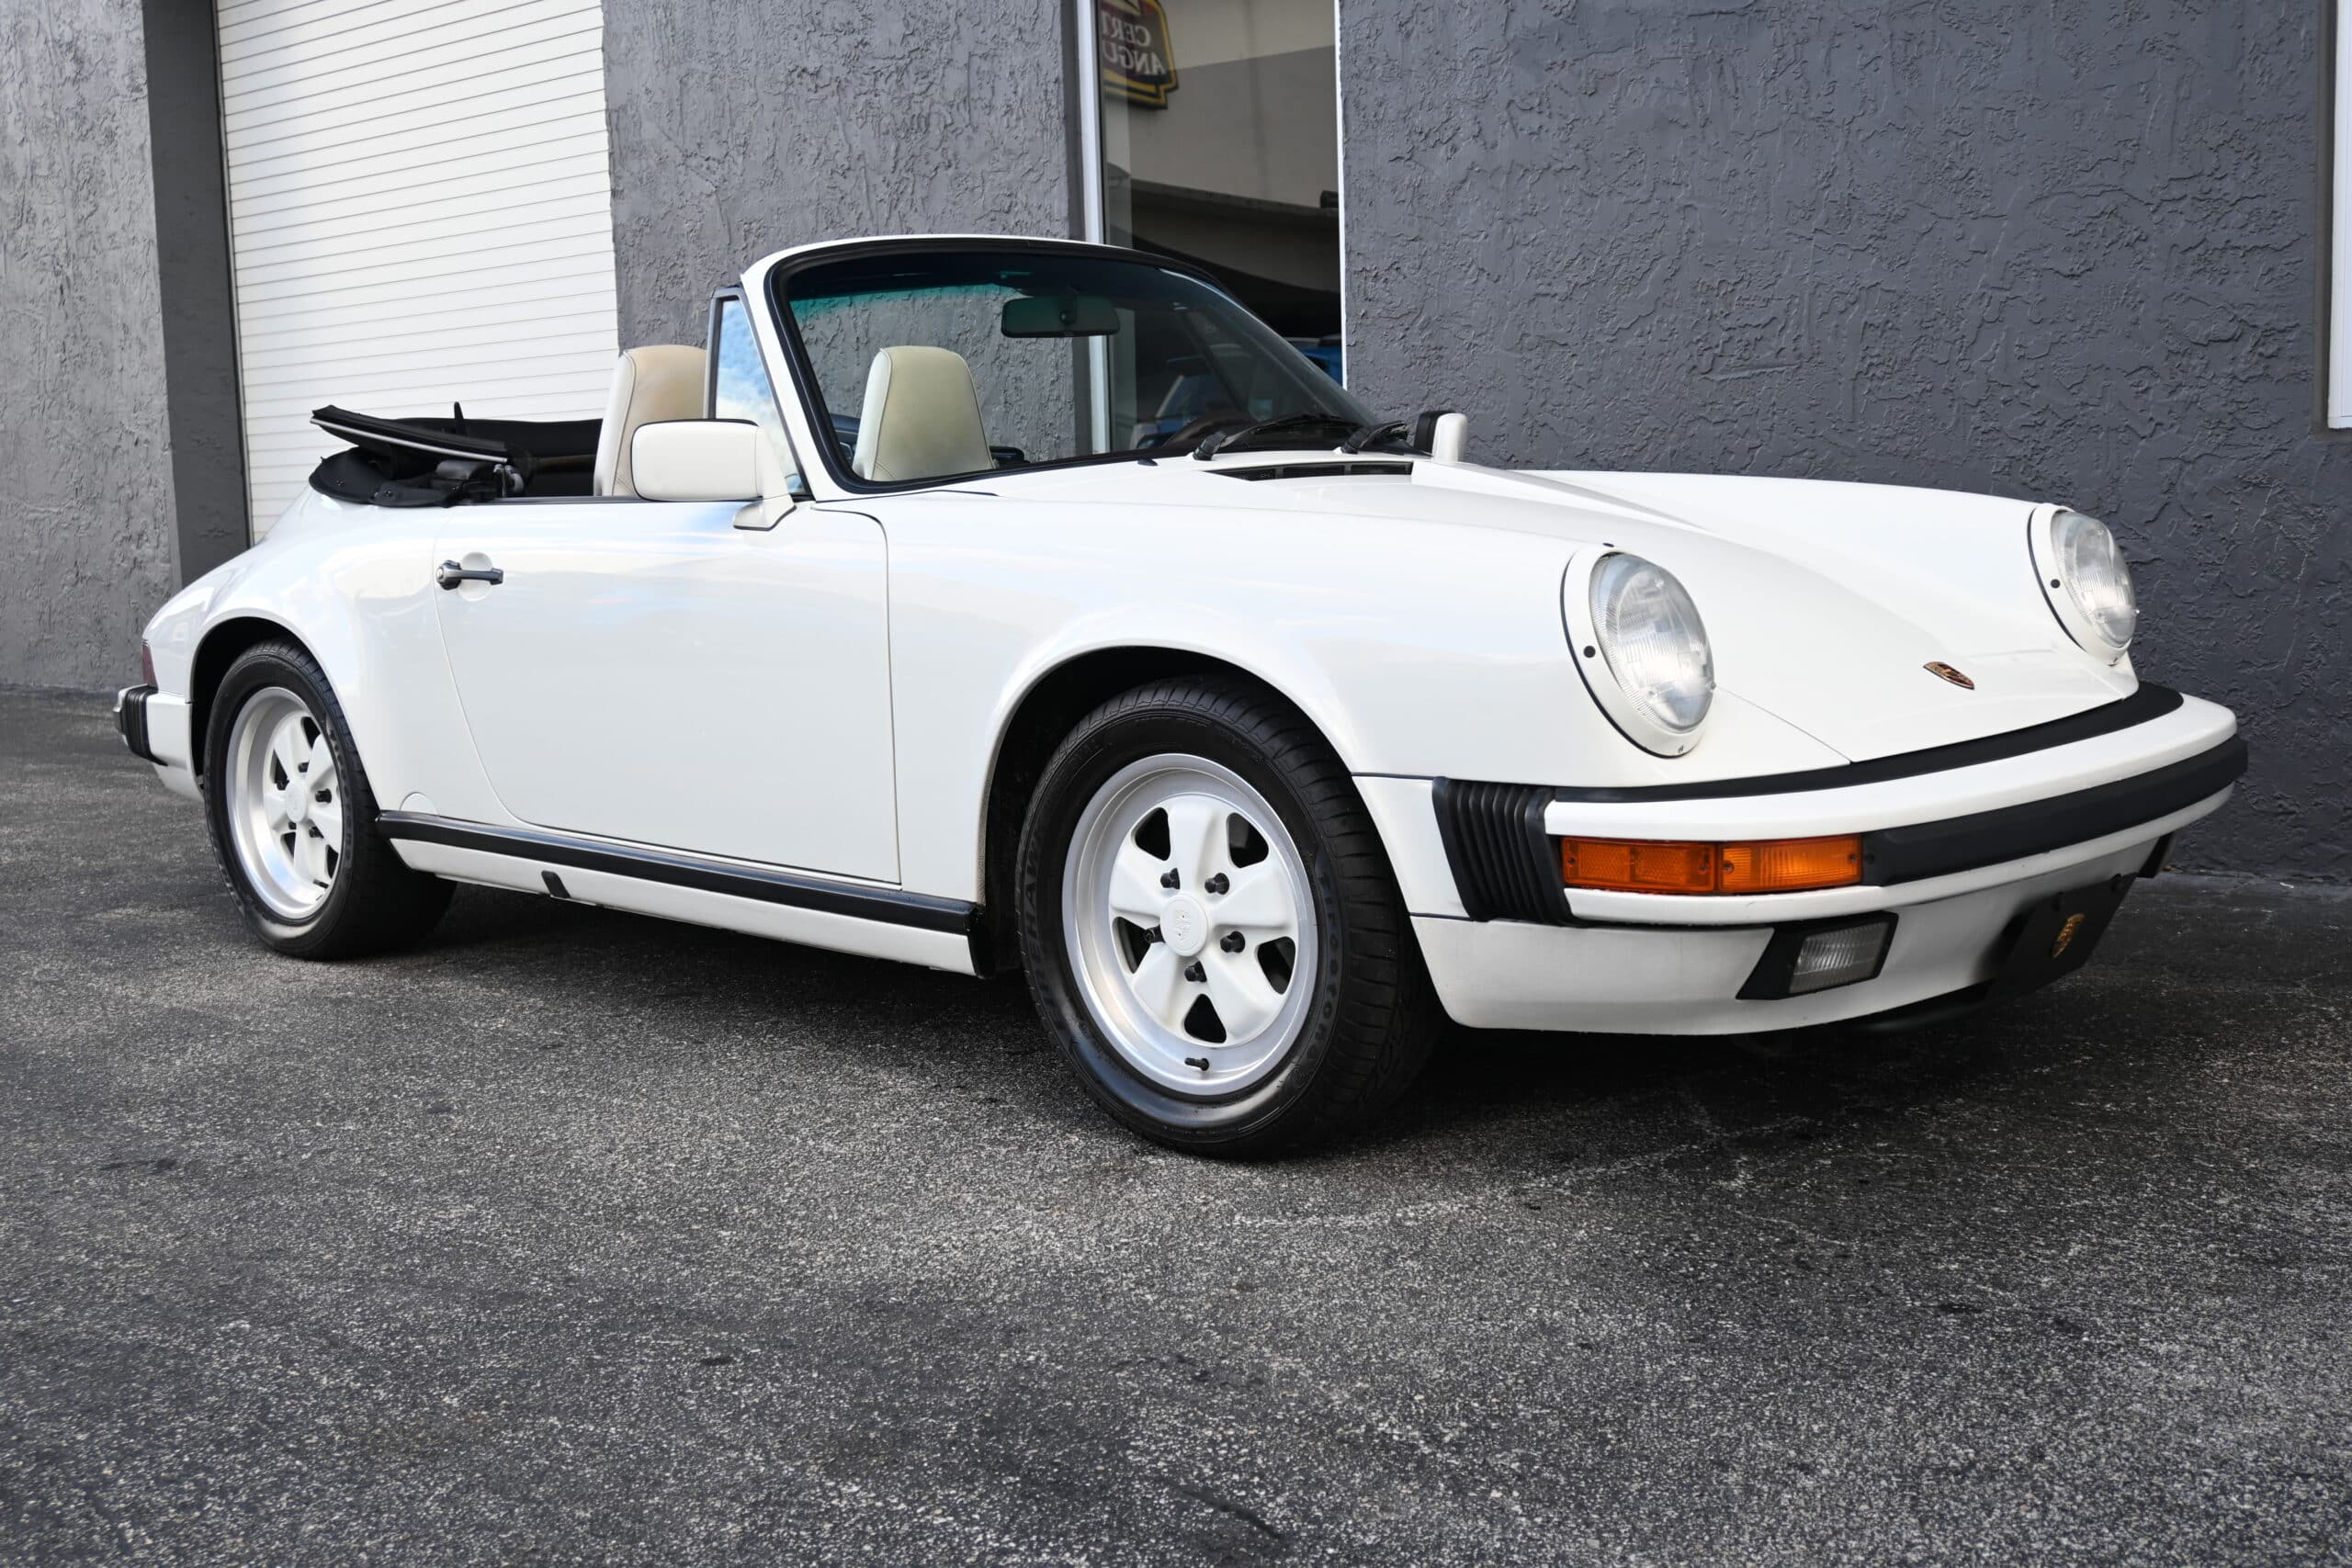 1988 Carrera Cabrio,G50, low miles with recent service at marque specialist, Iconic 1980’s color combo, outstanding condition, tools.